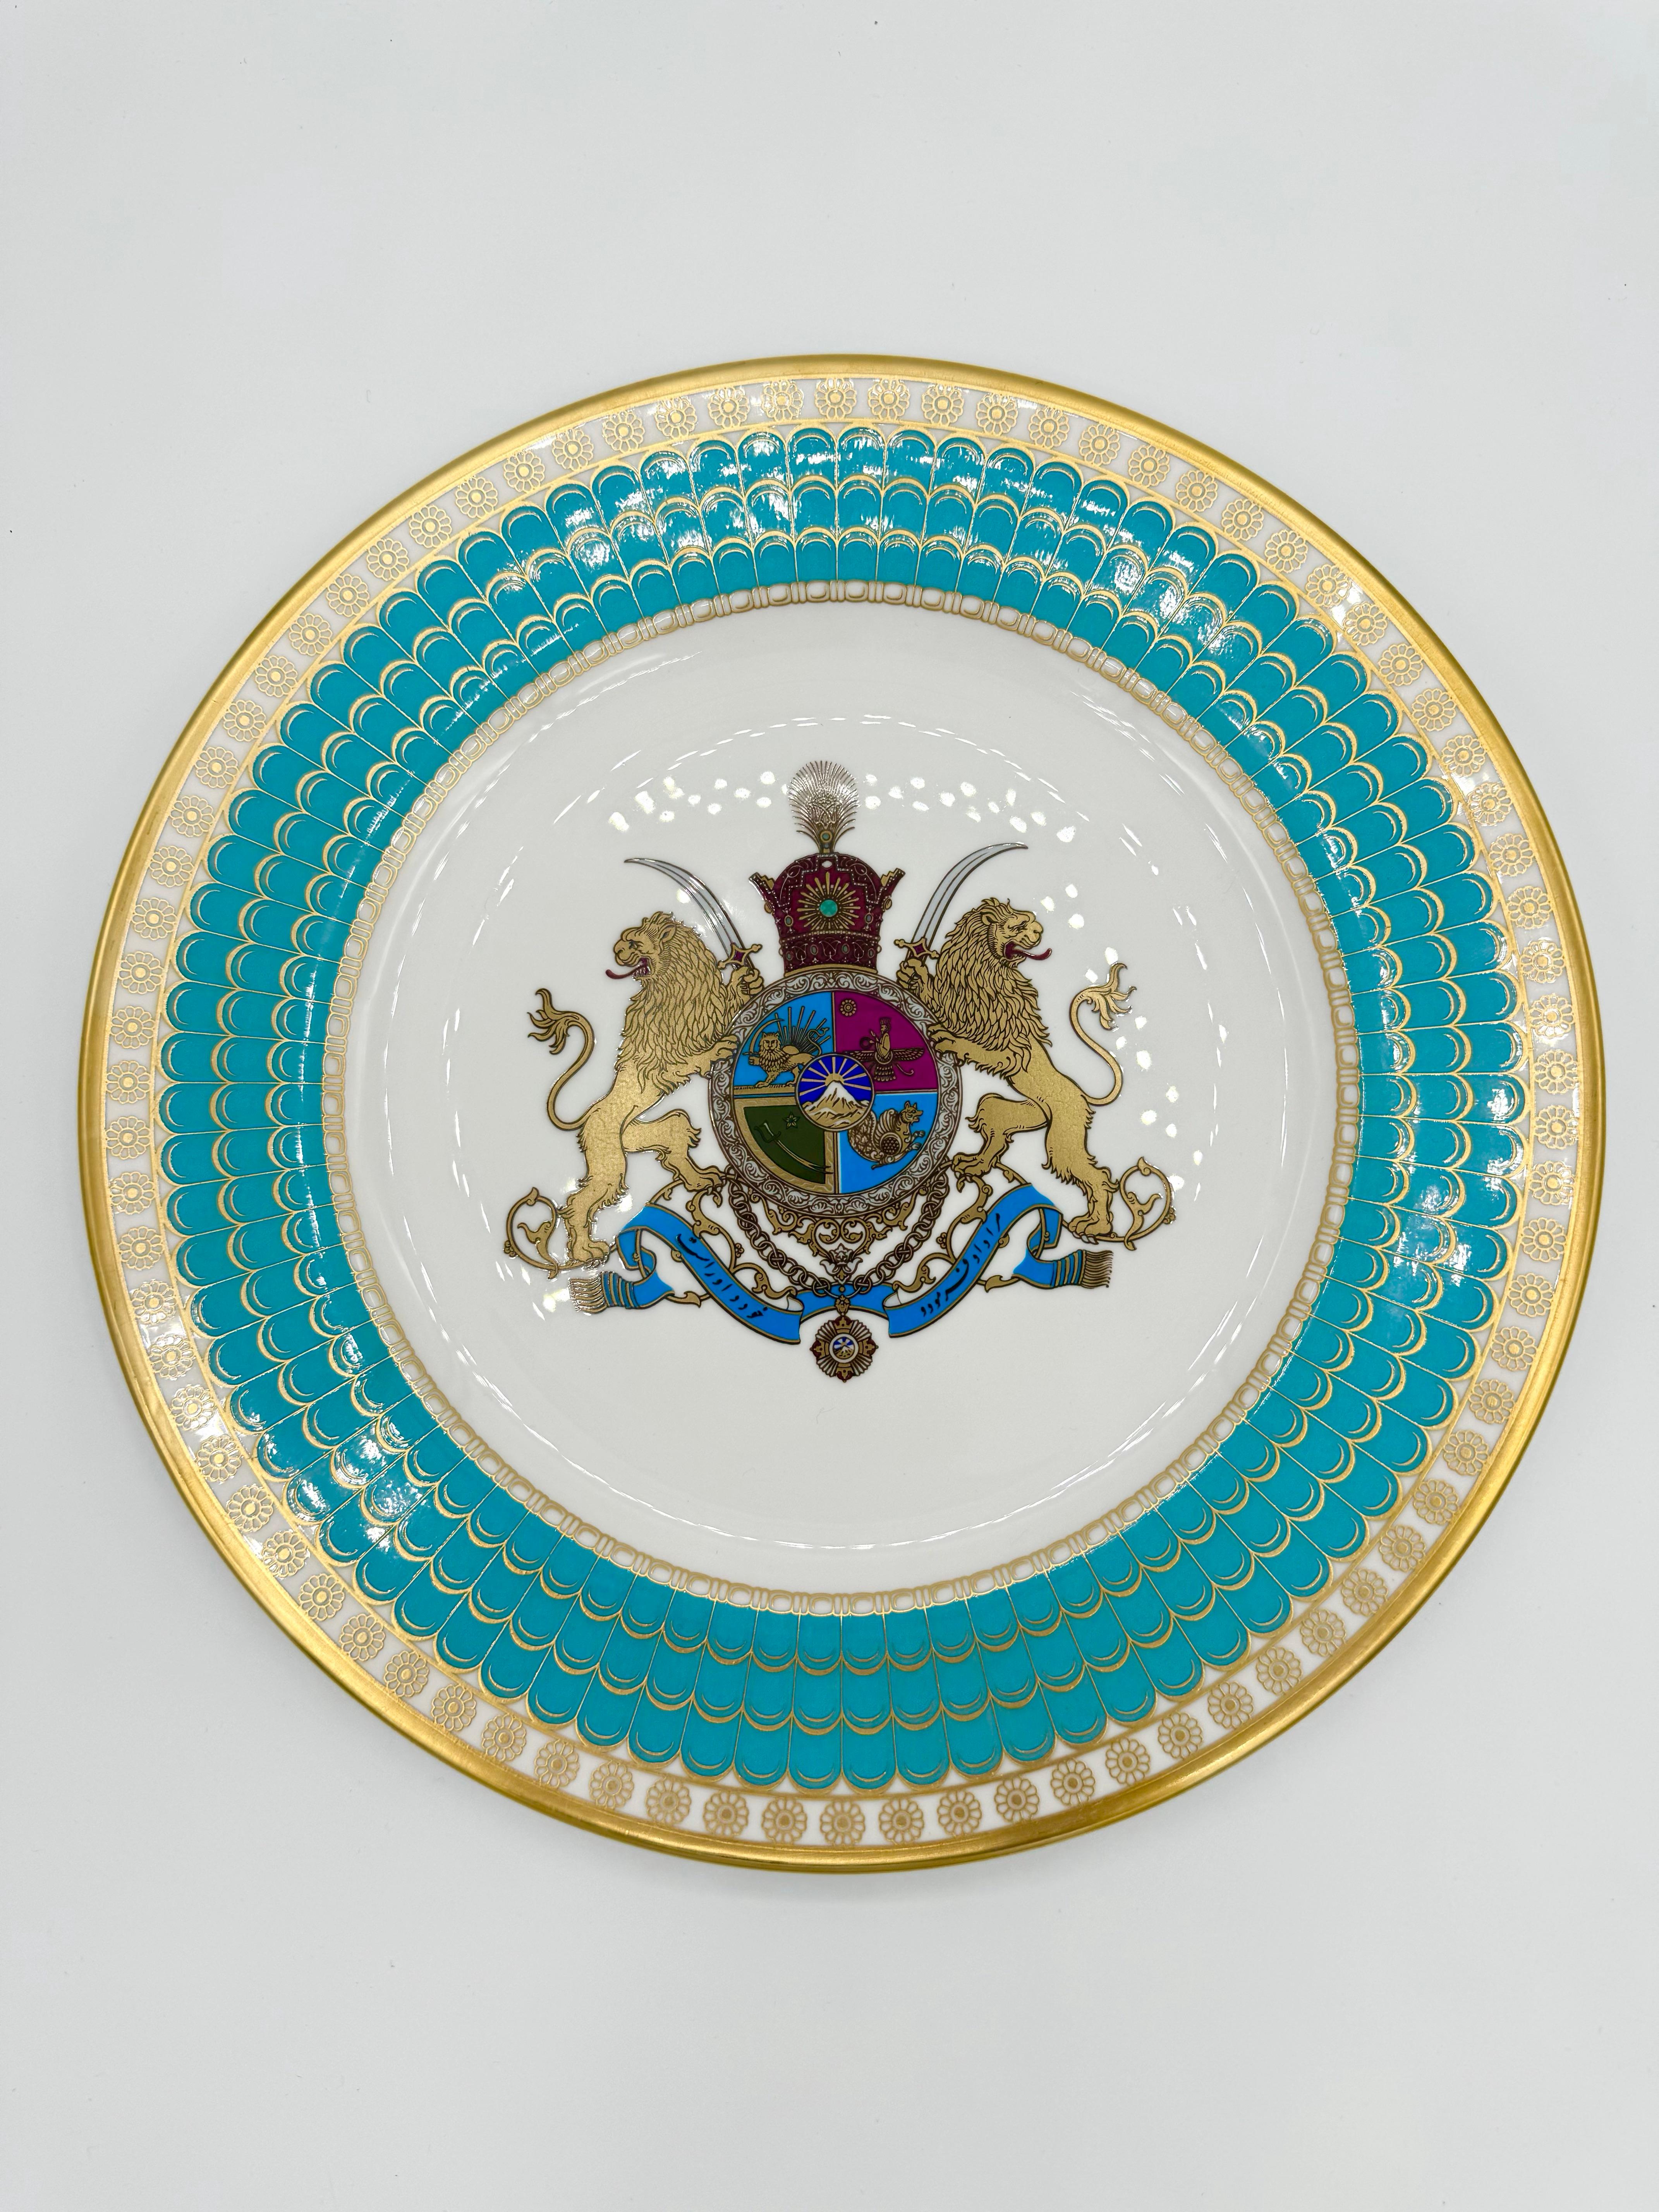 One of a limited edition of 10,000 made by Spode in 1971 to commemorate 2,500 years of Persian Monarchy. 27cm in diameter.